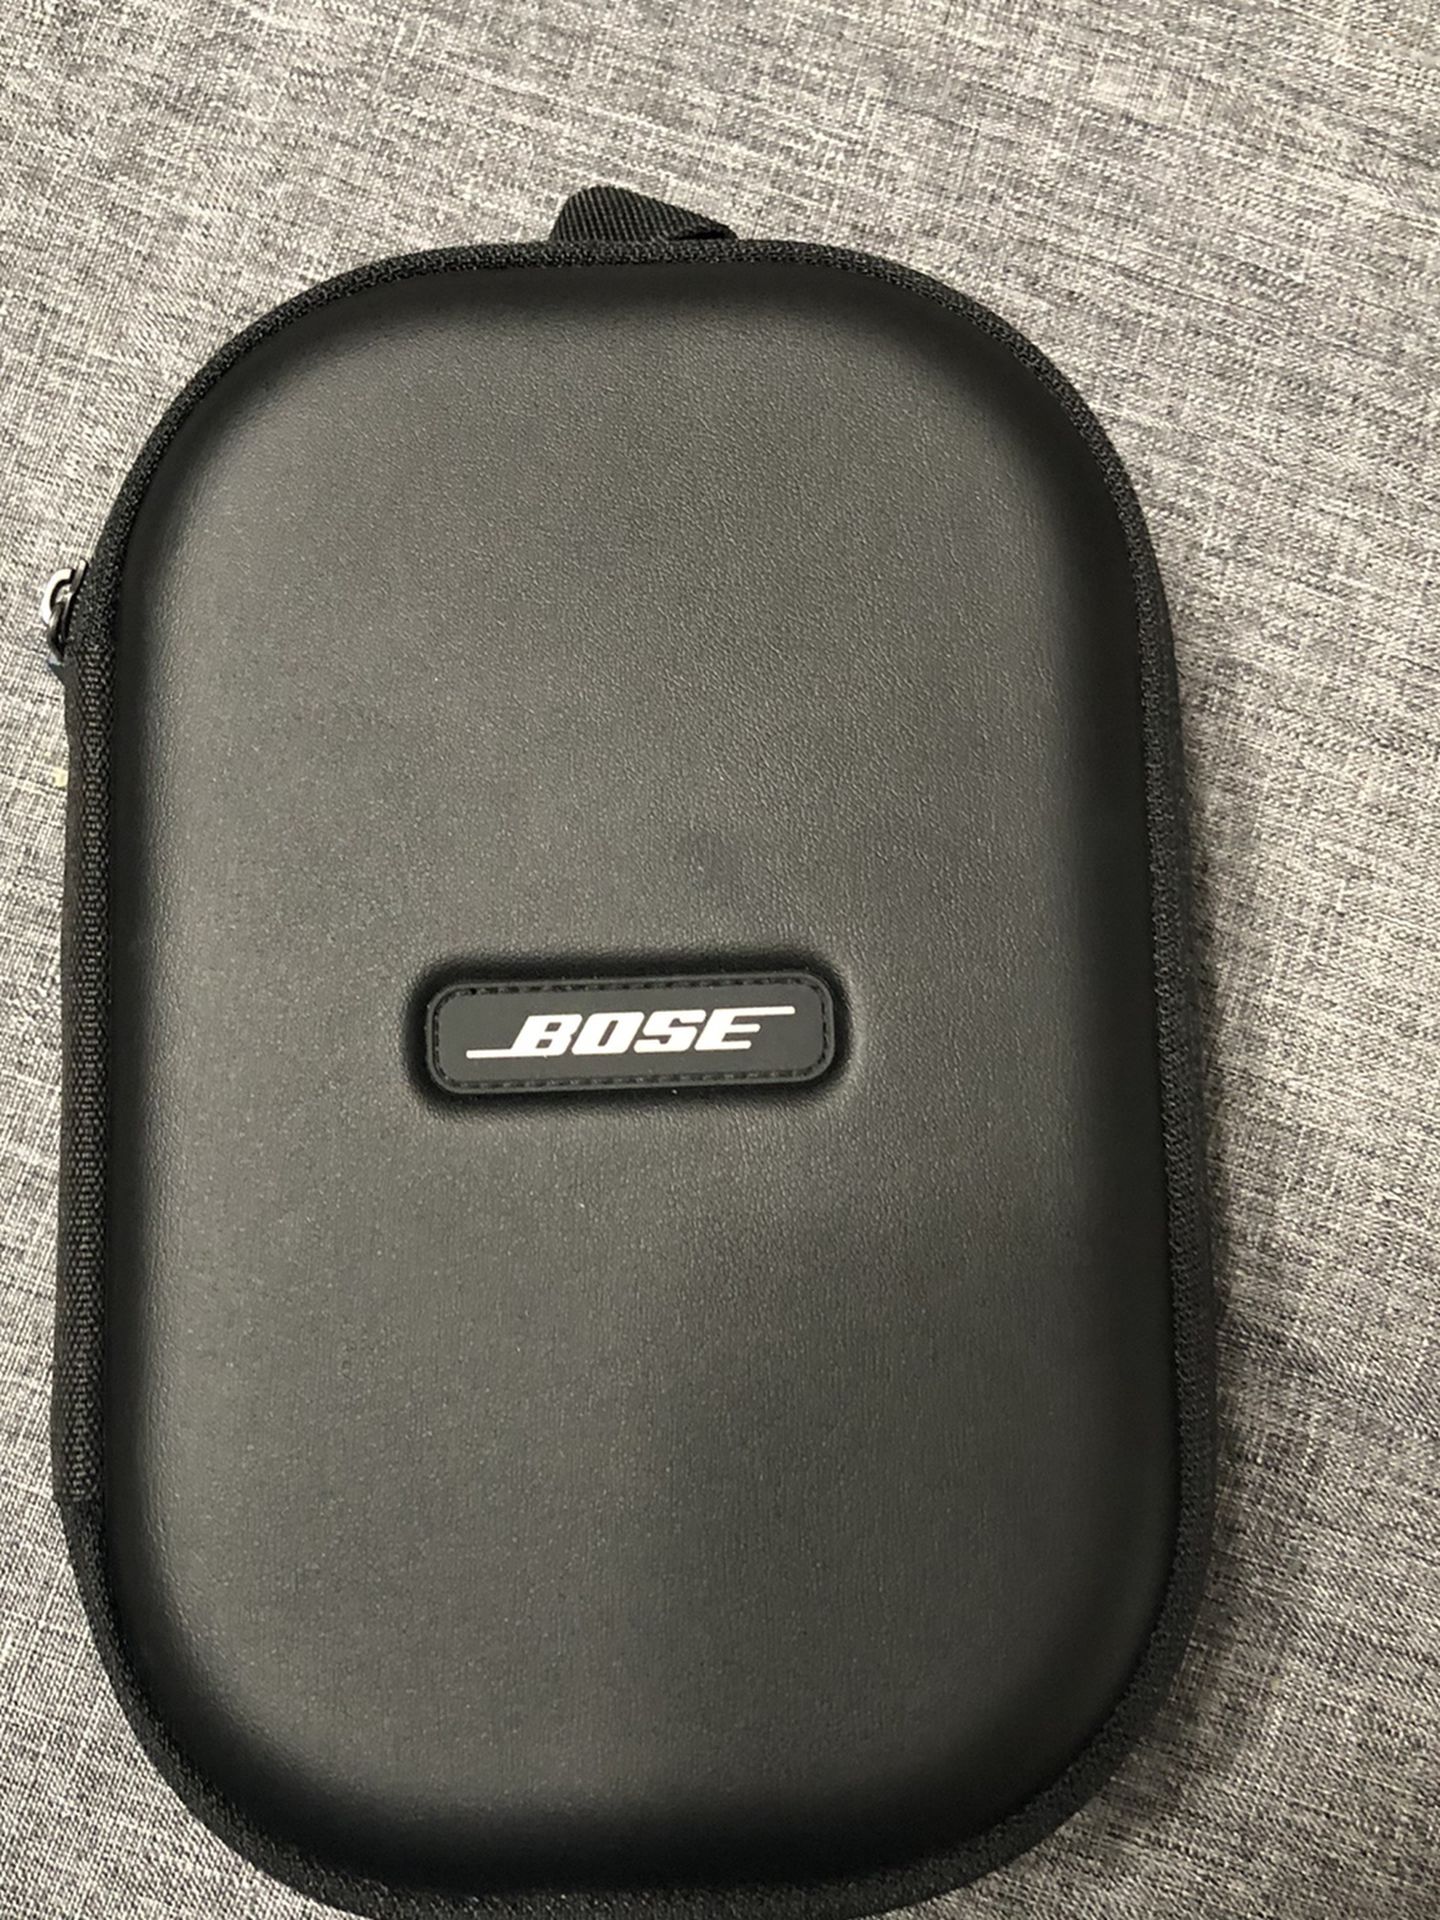 Bose Wired Noise Cancelling Headphones